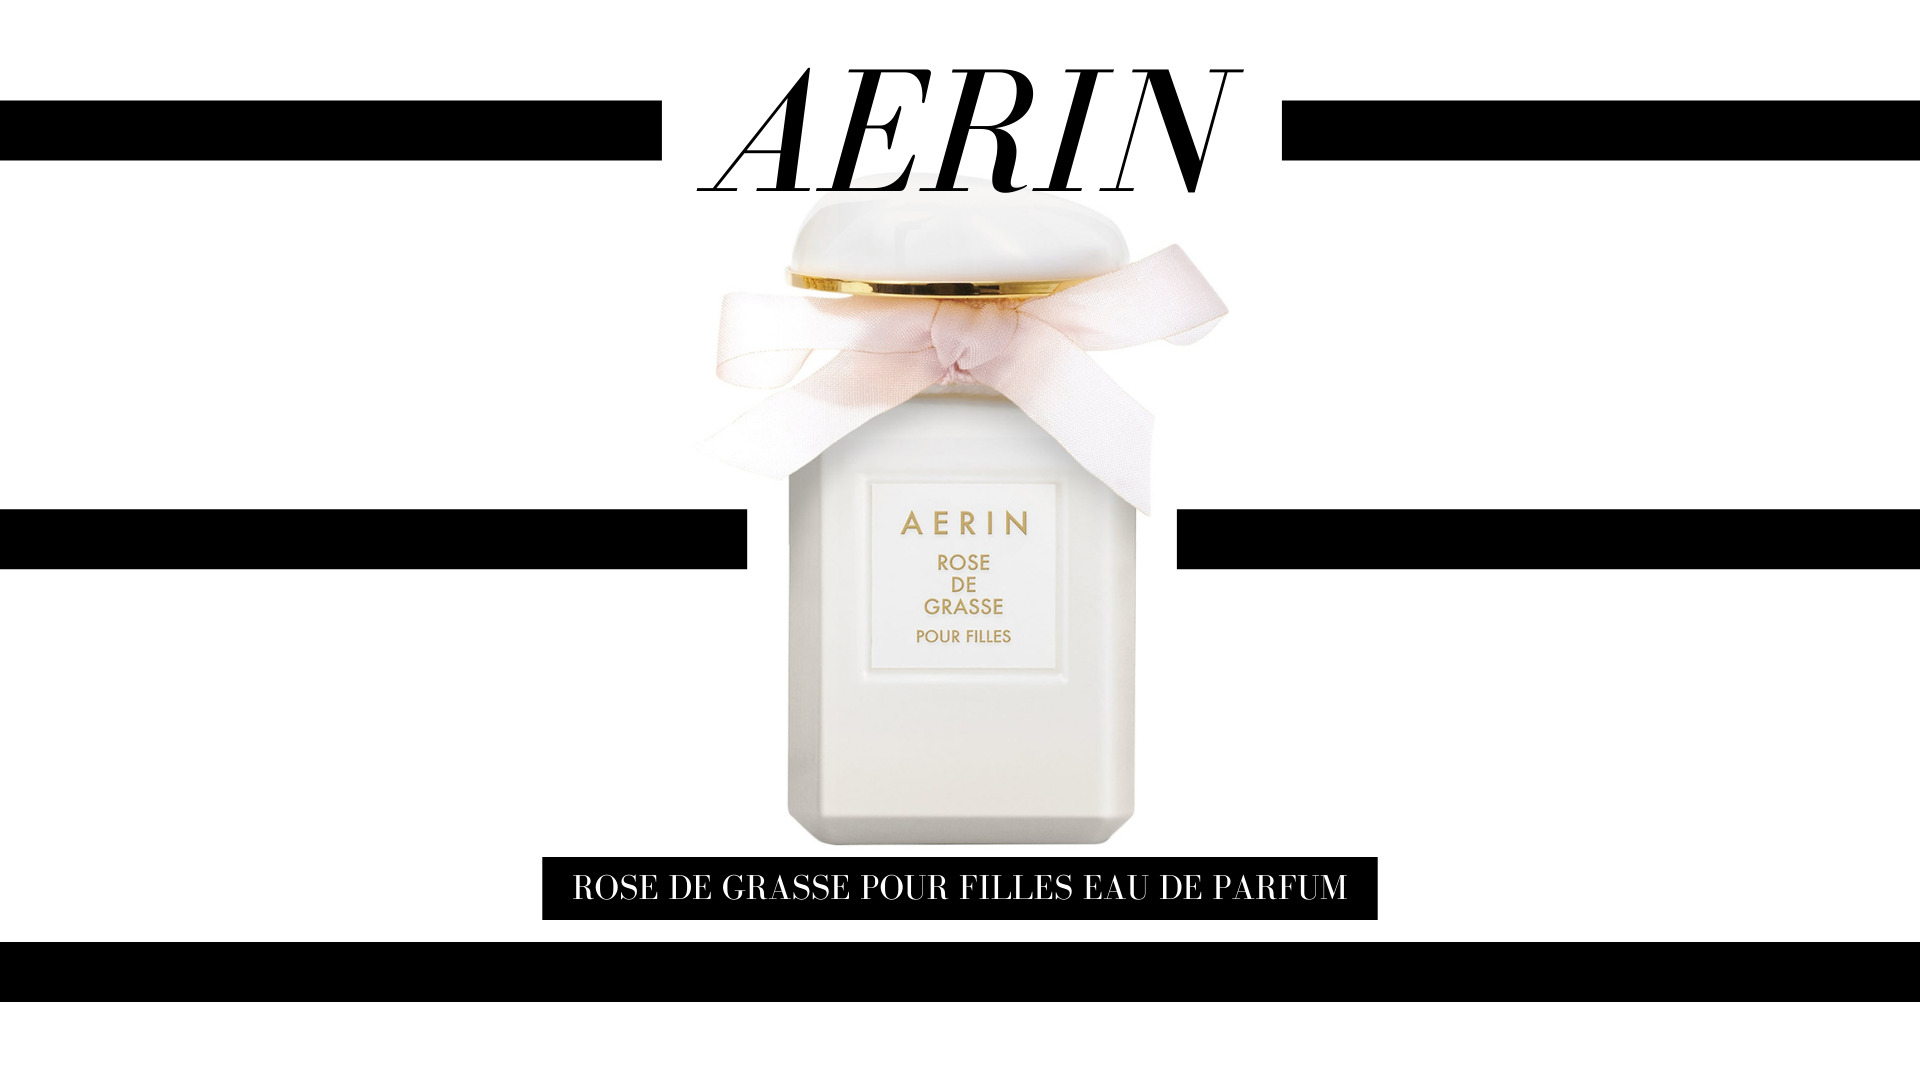 This Aerin floral fragrance is such a perfect combination of notes of pear, fresh rose, and soft musk. The objective is to "capture the beauty of a new blossom on a sunny morning in the garden." Such a beautiful vision! This super feminine perfume is such a dream!